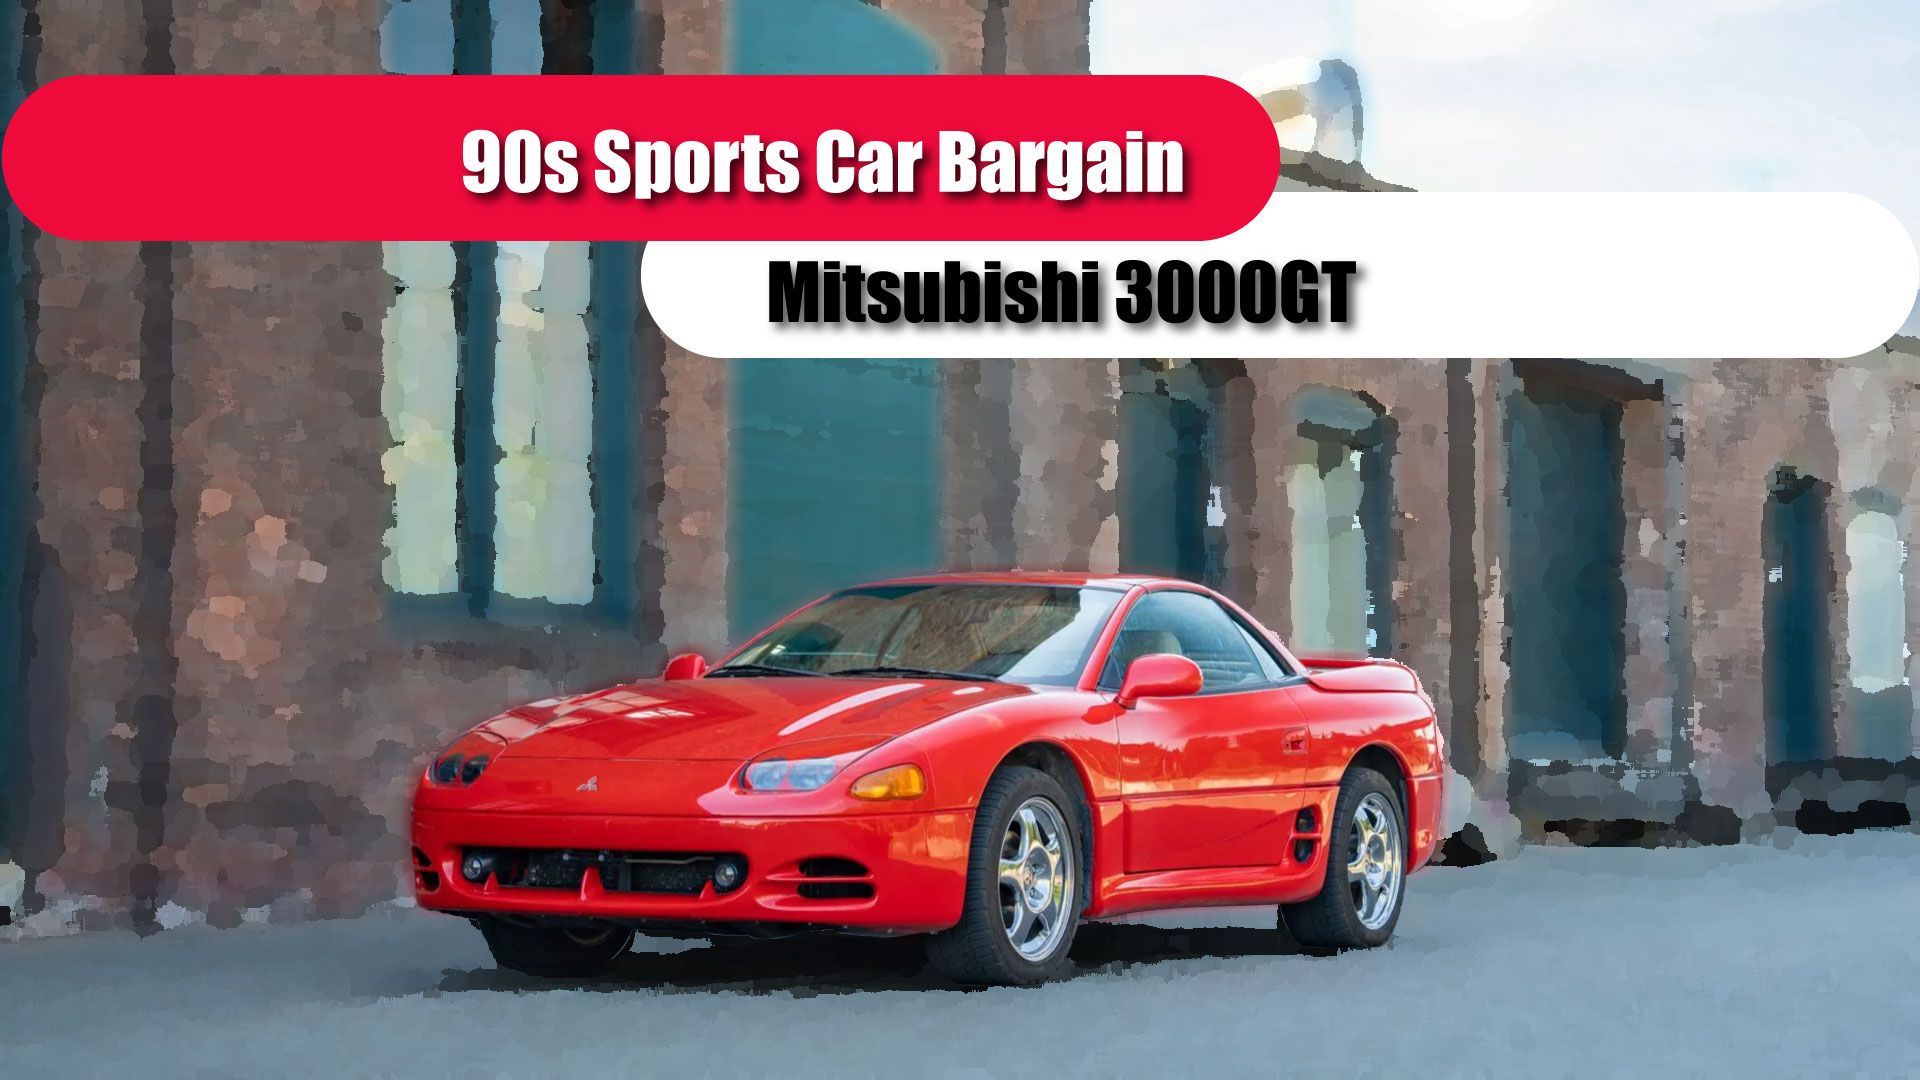 Why The Mitsubishi 3000GT Is An Excellent '90s Sports Car Bargain 